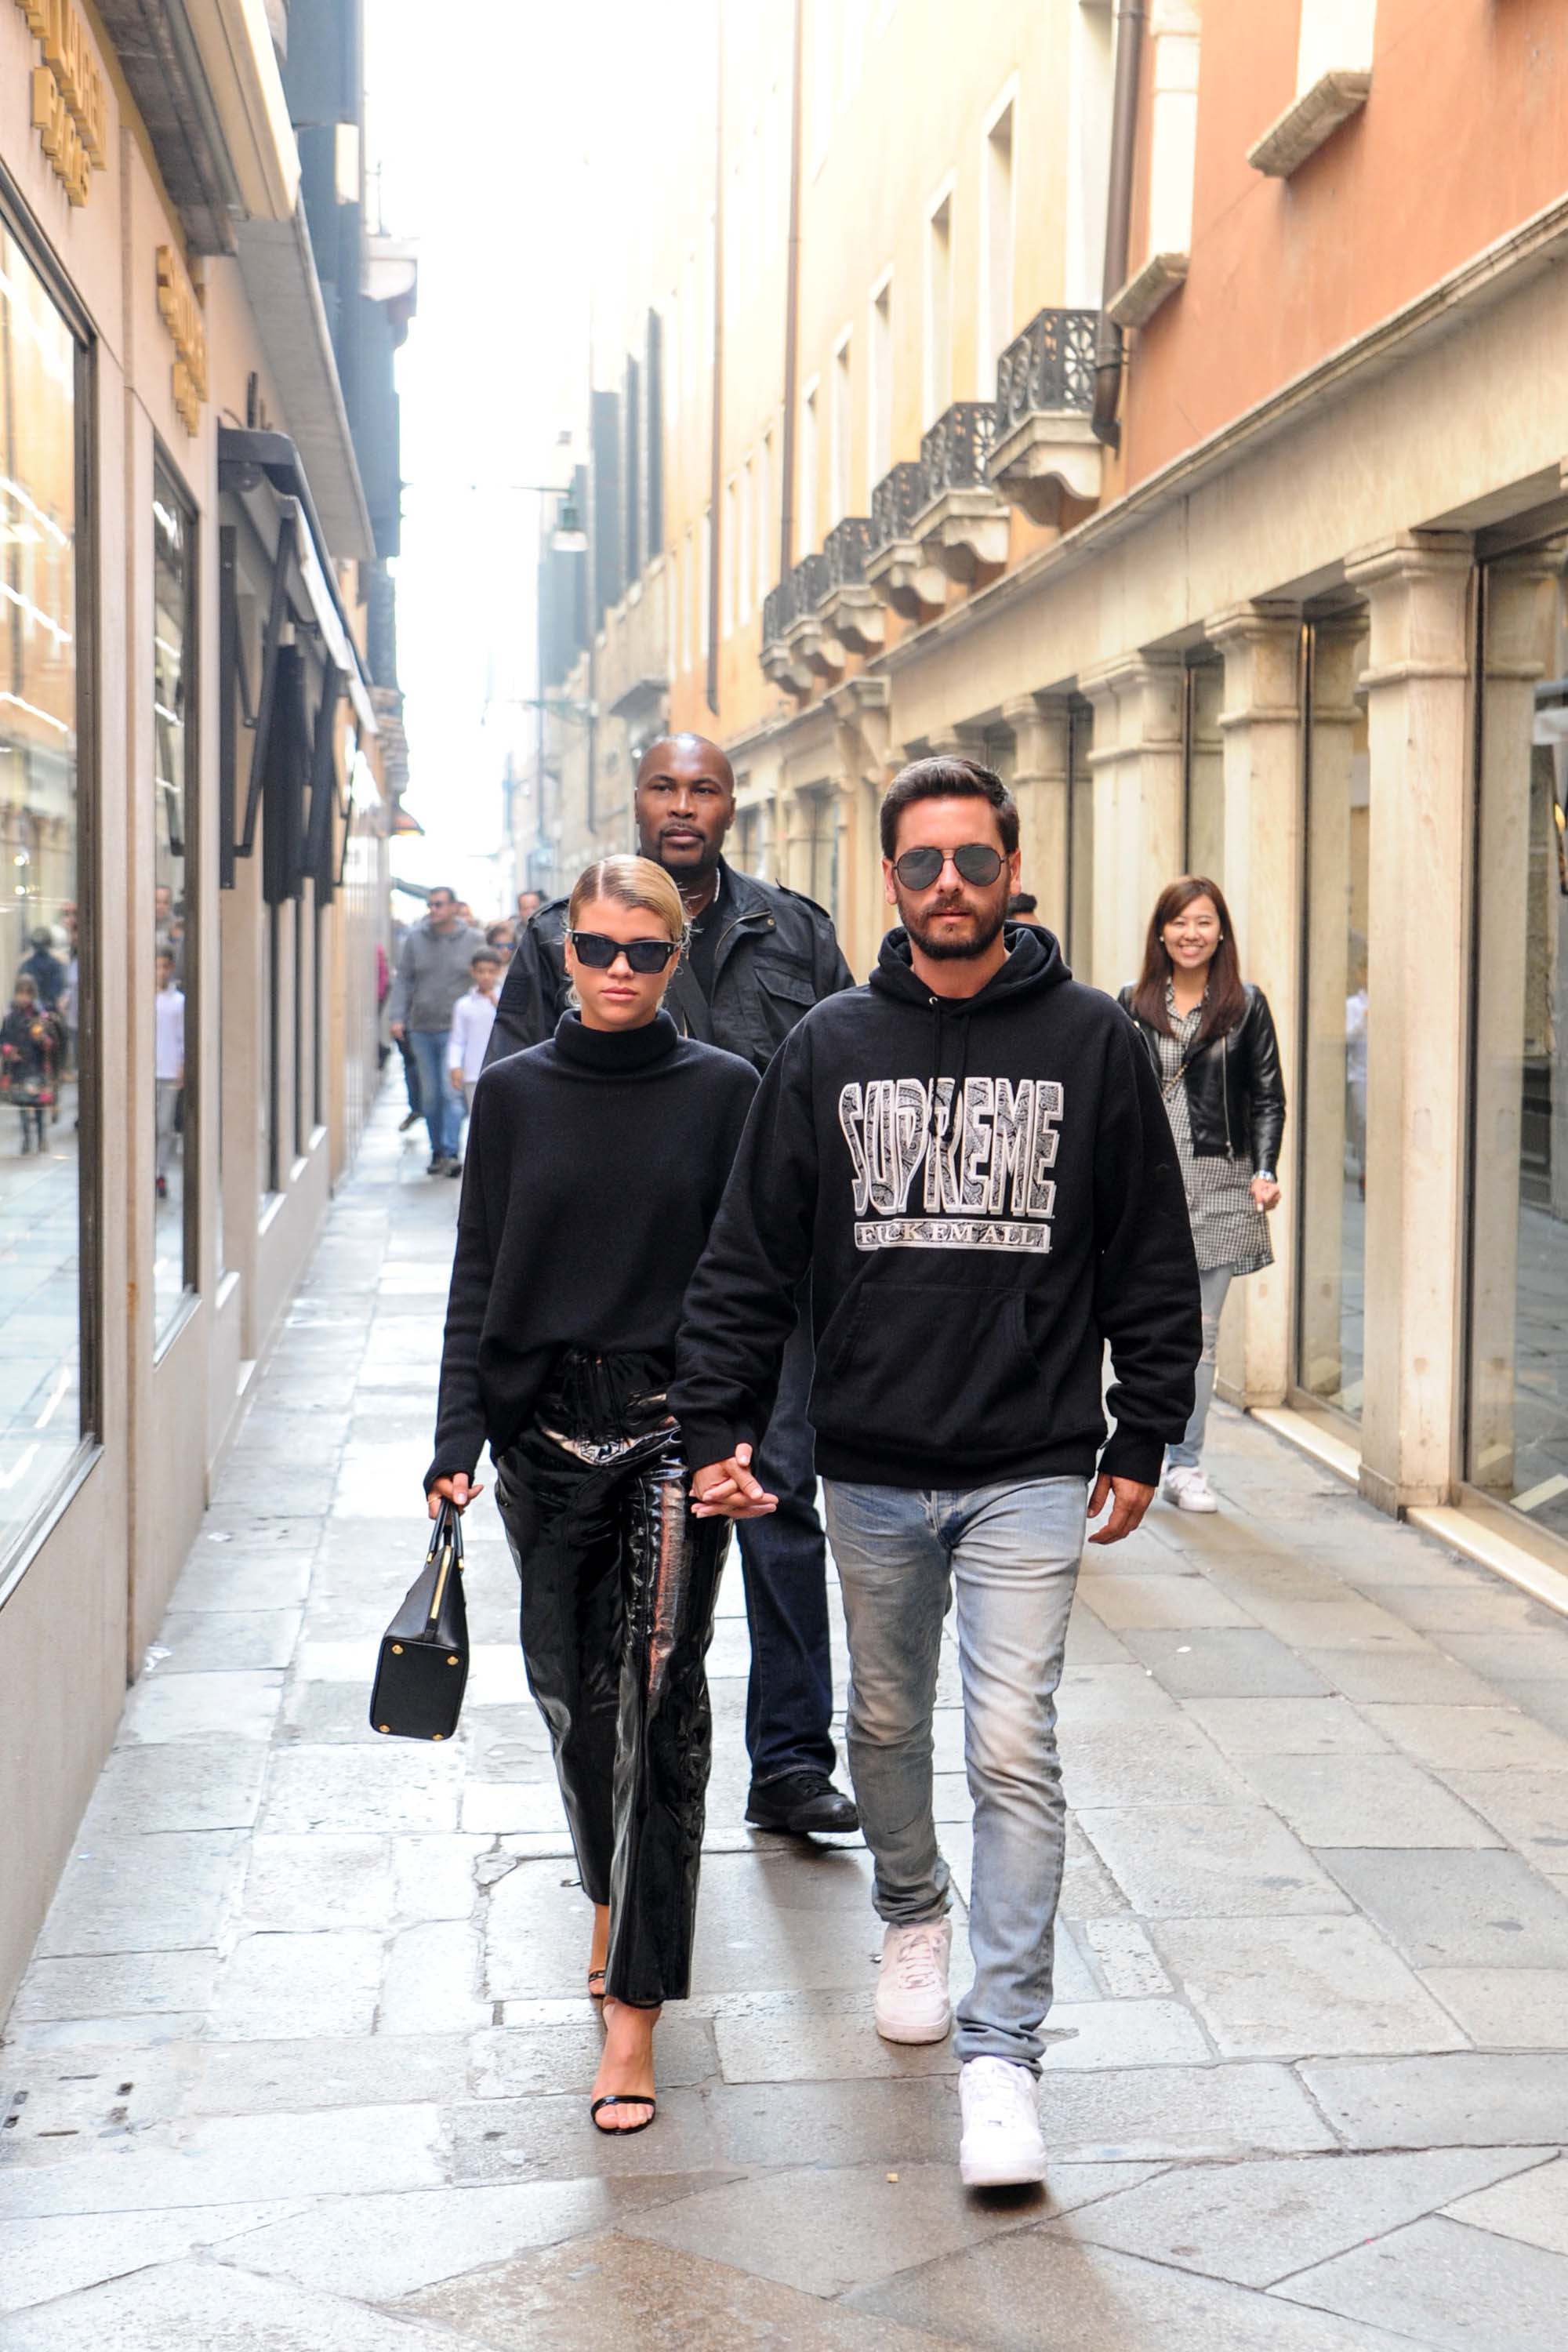 Sofia Richie out in Venice